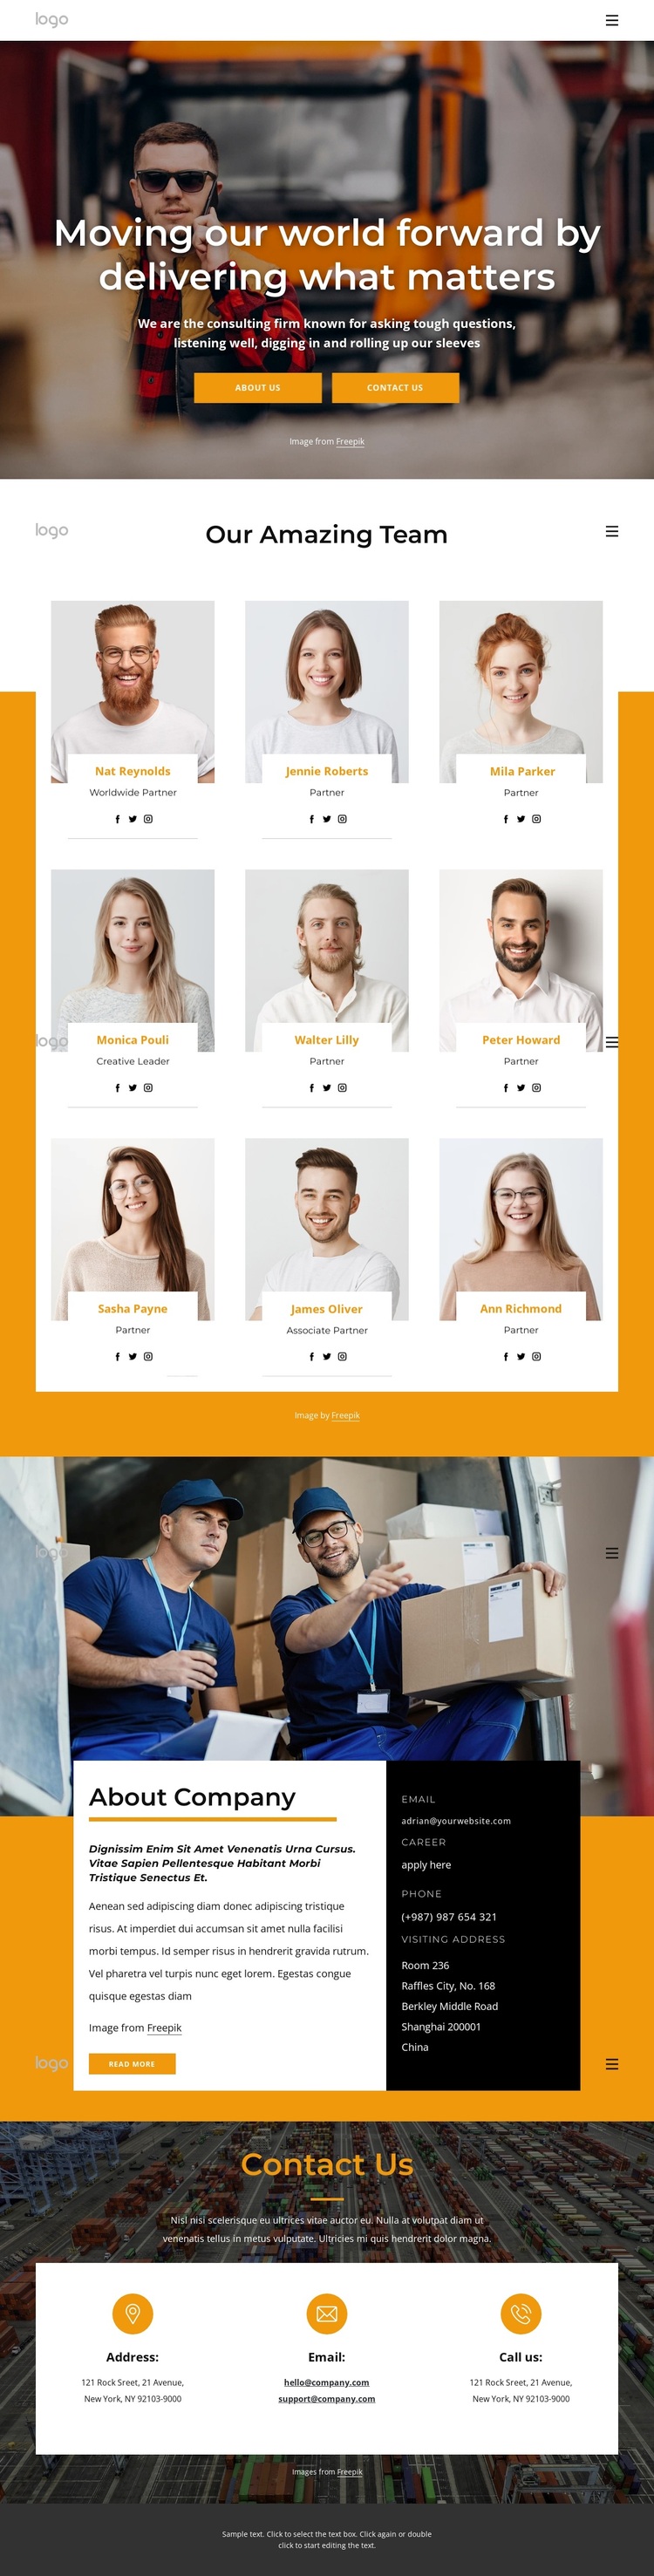 International parcel delivery company Template